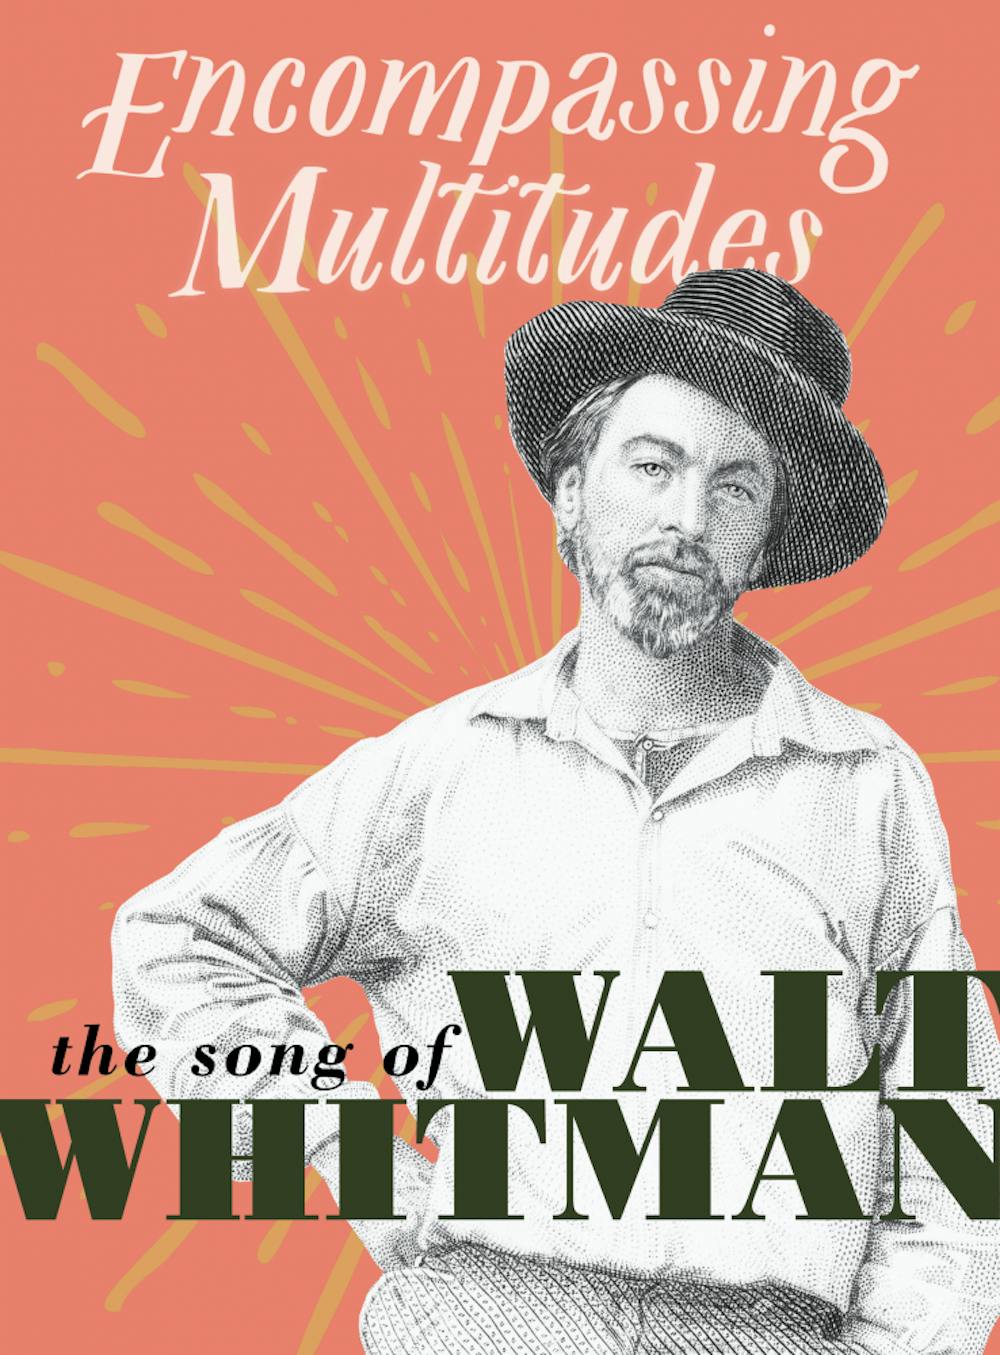 <p>“Encompassing Multitudes: The Song of Walt Whitman” will be on display at Special Collections through July 27, 2019.&nbsp;</p>